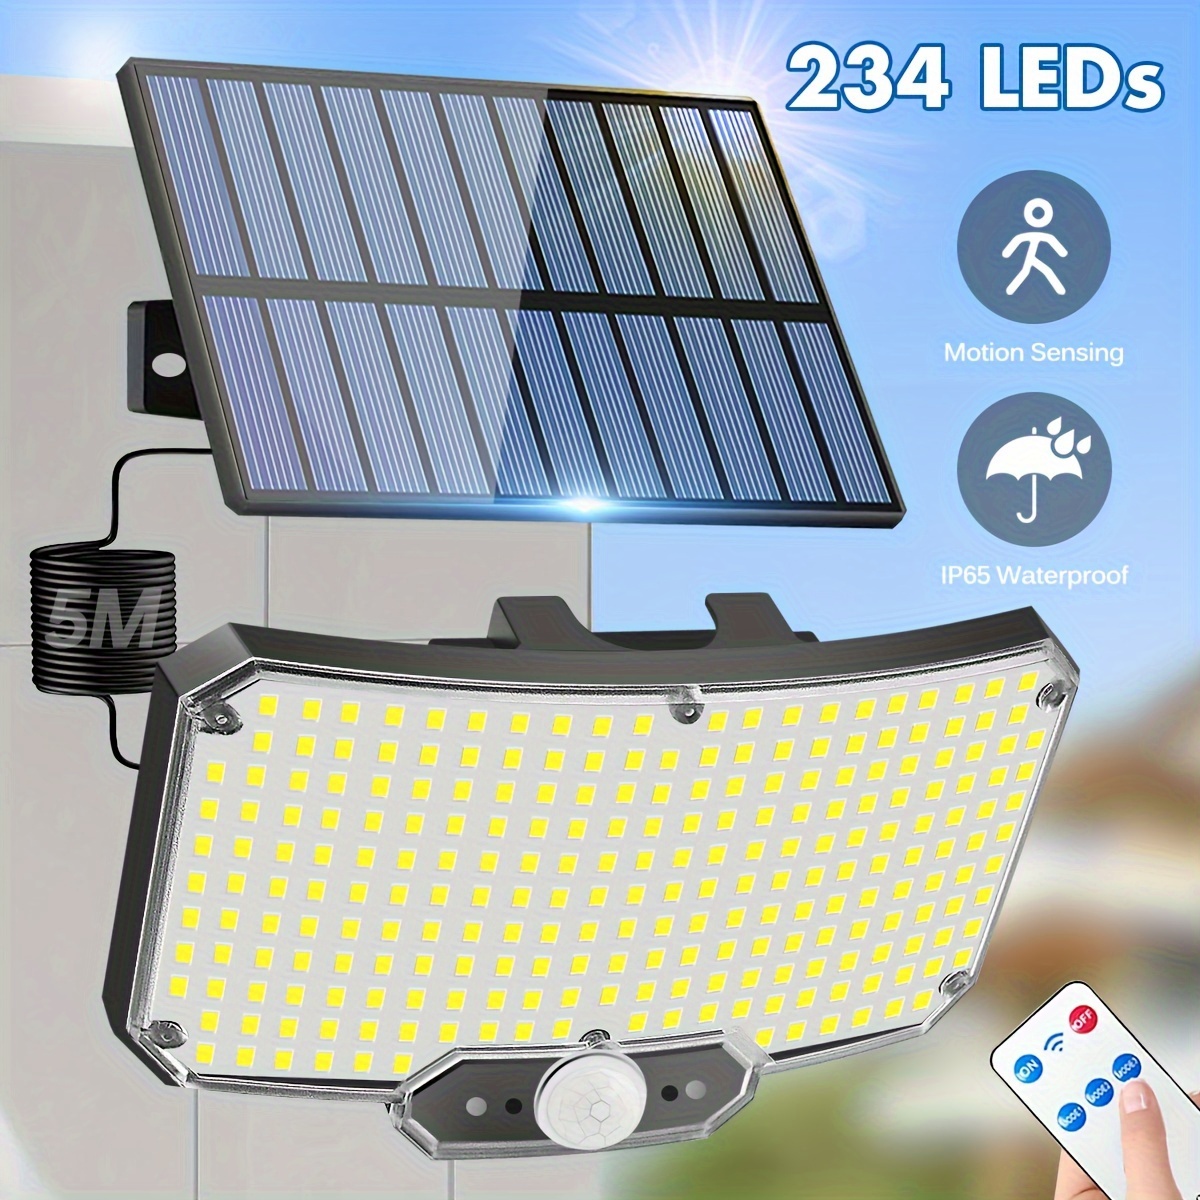 

Solar-powered Outdoor Lights With Motion Sensor - 234 Led, 6500k, 3 Lighting Modes, Easy Install For Yard, Garden, Pathway & Patio Security Solar Lights Outdoor Garden